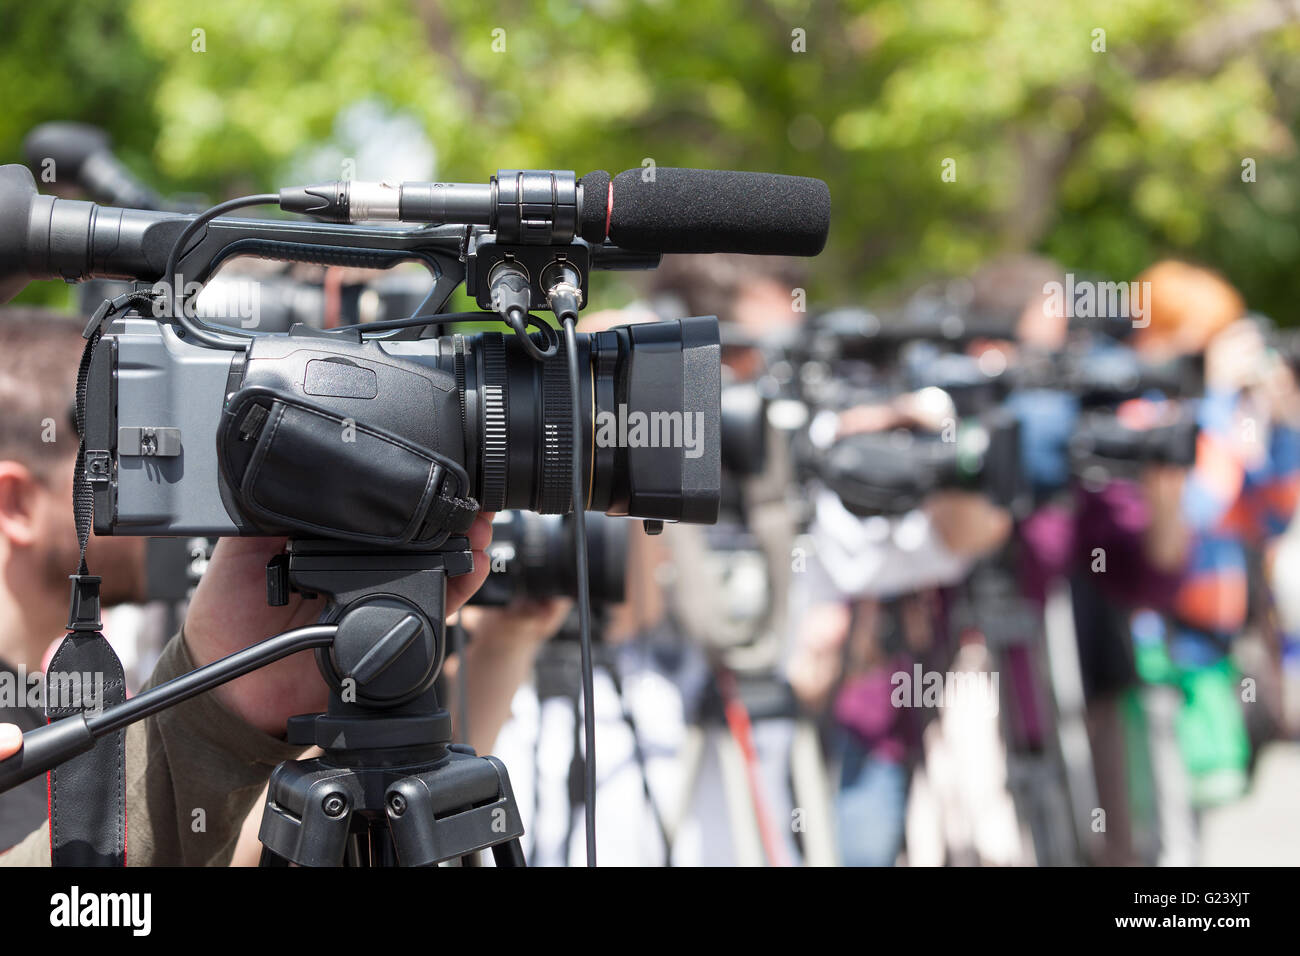 News conference. Covering an event with a video camera. Stock Photo